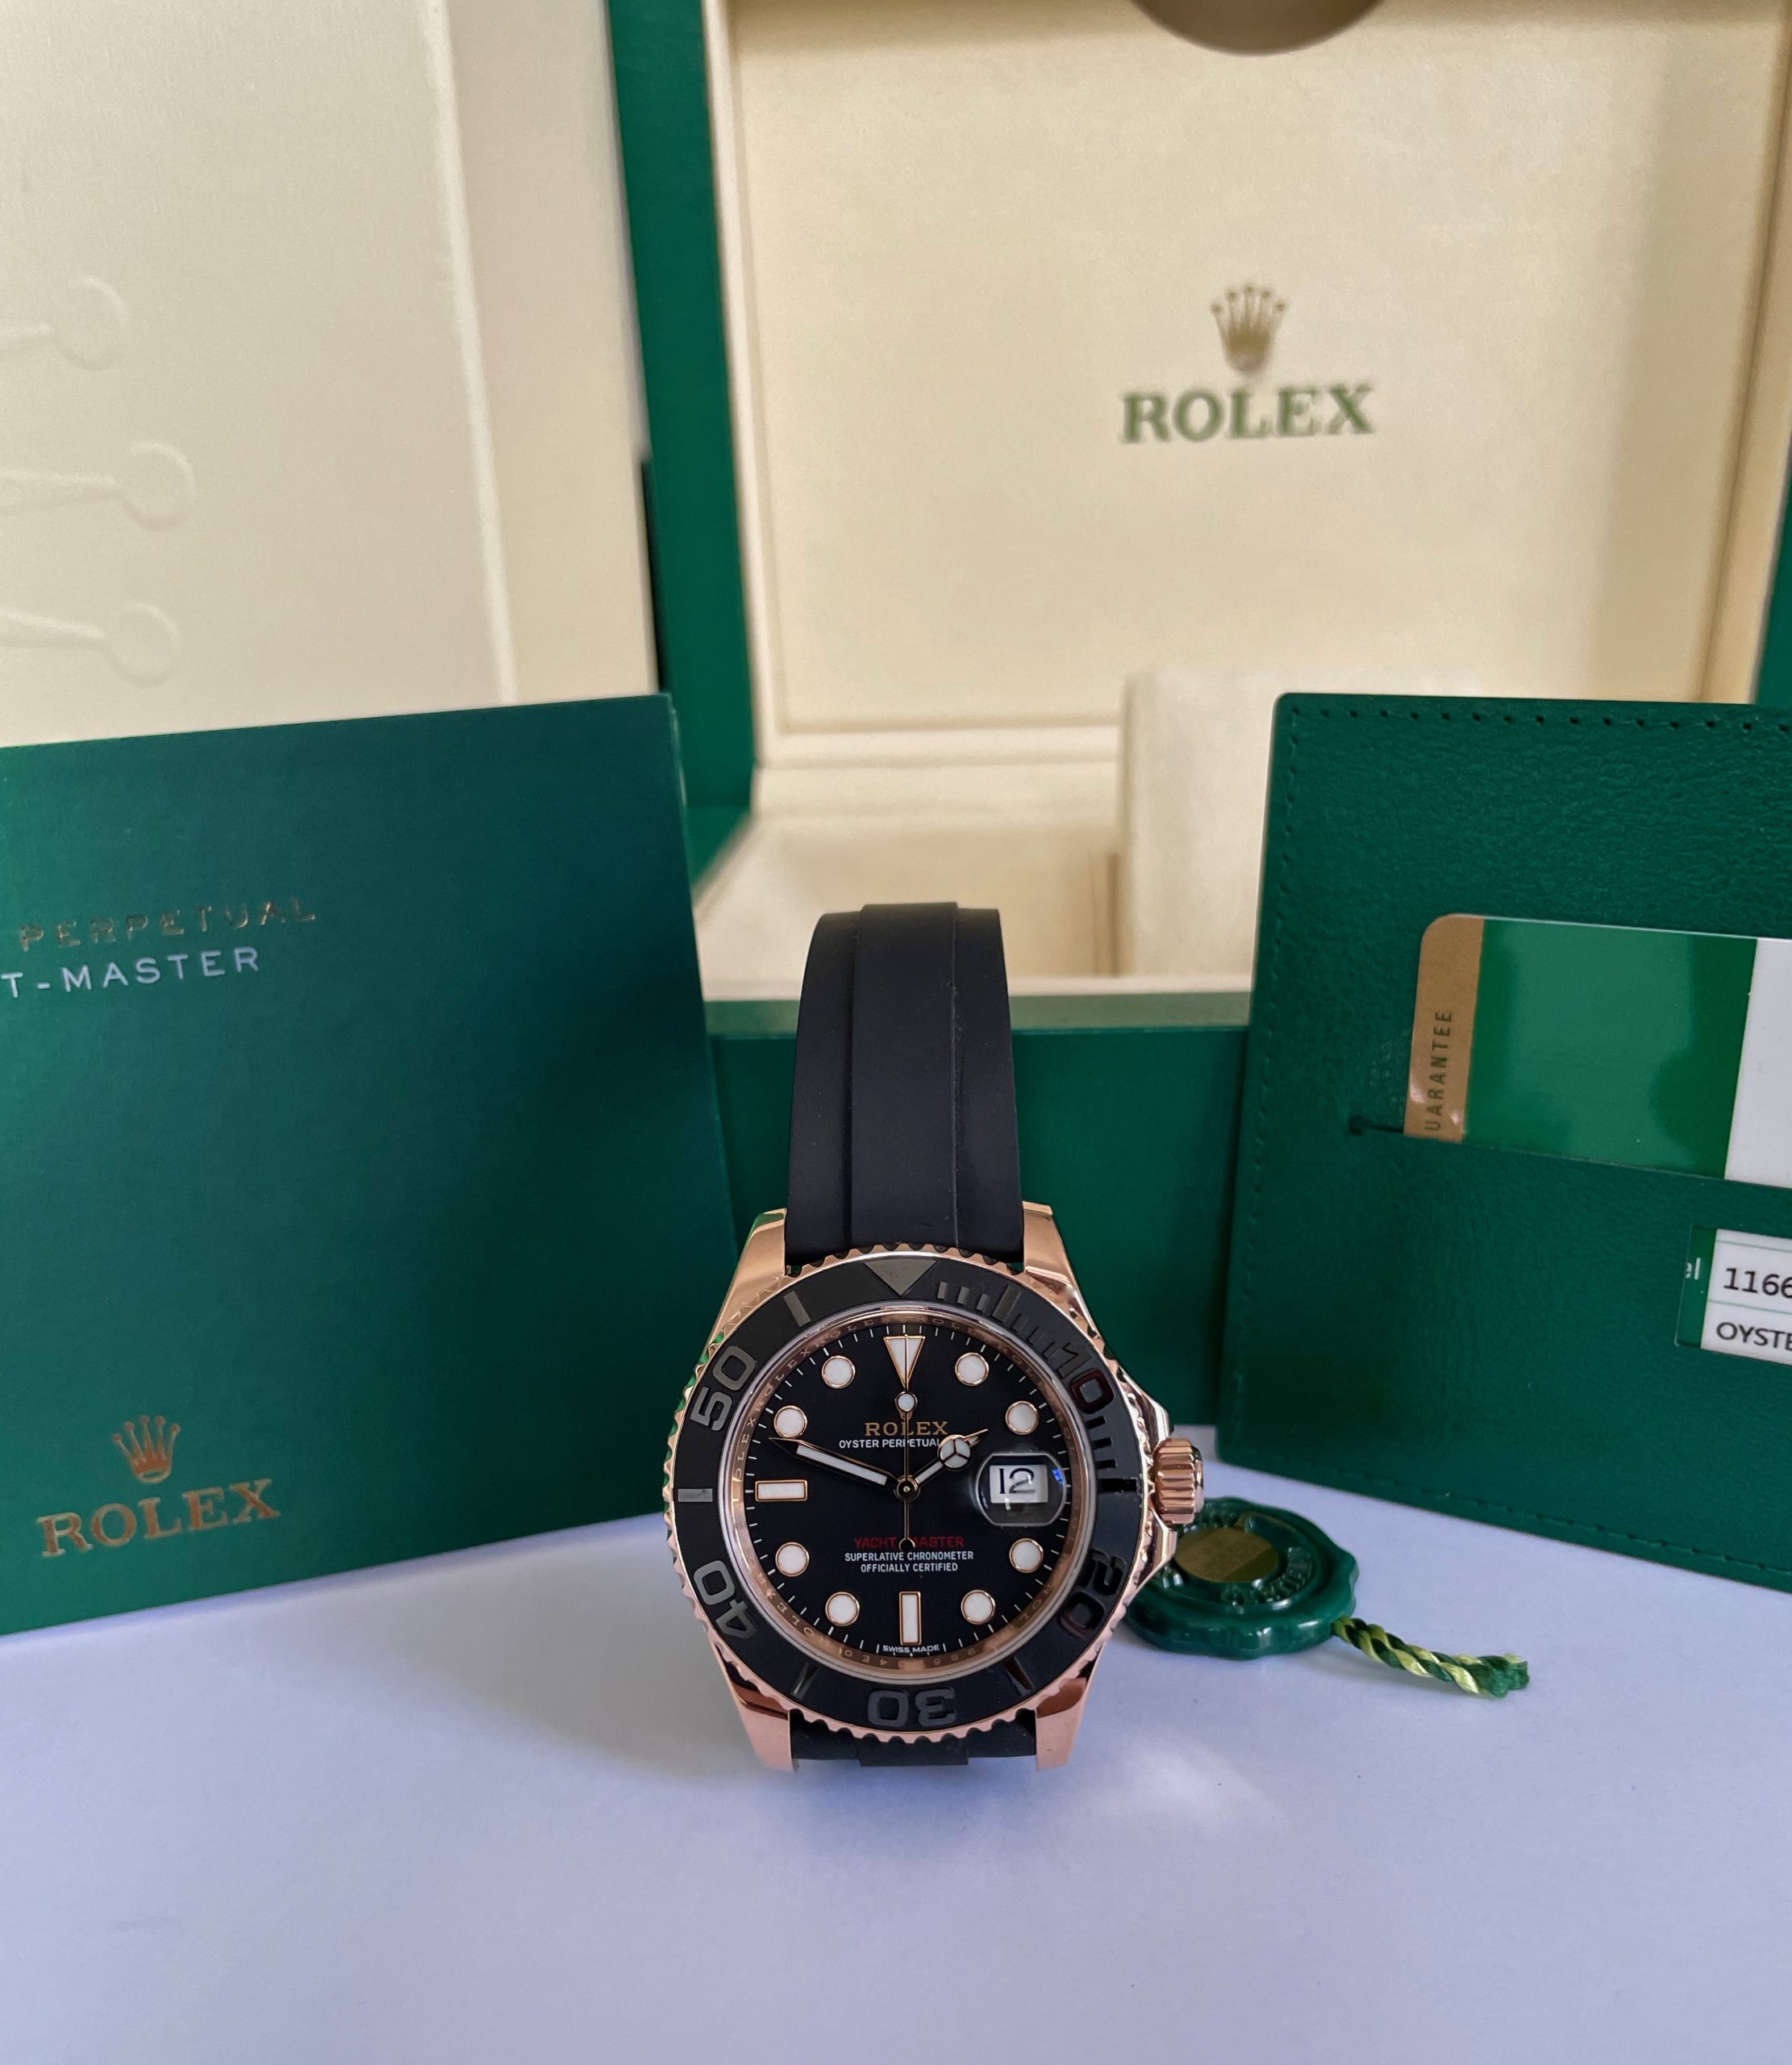 ROLEX ROSE GOLD YACHT-MASTER OYSTER-FLEX MODEL 116655 - Carr Watches